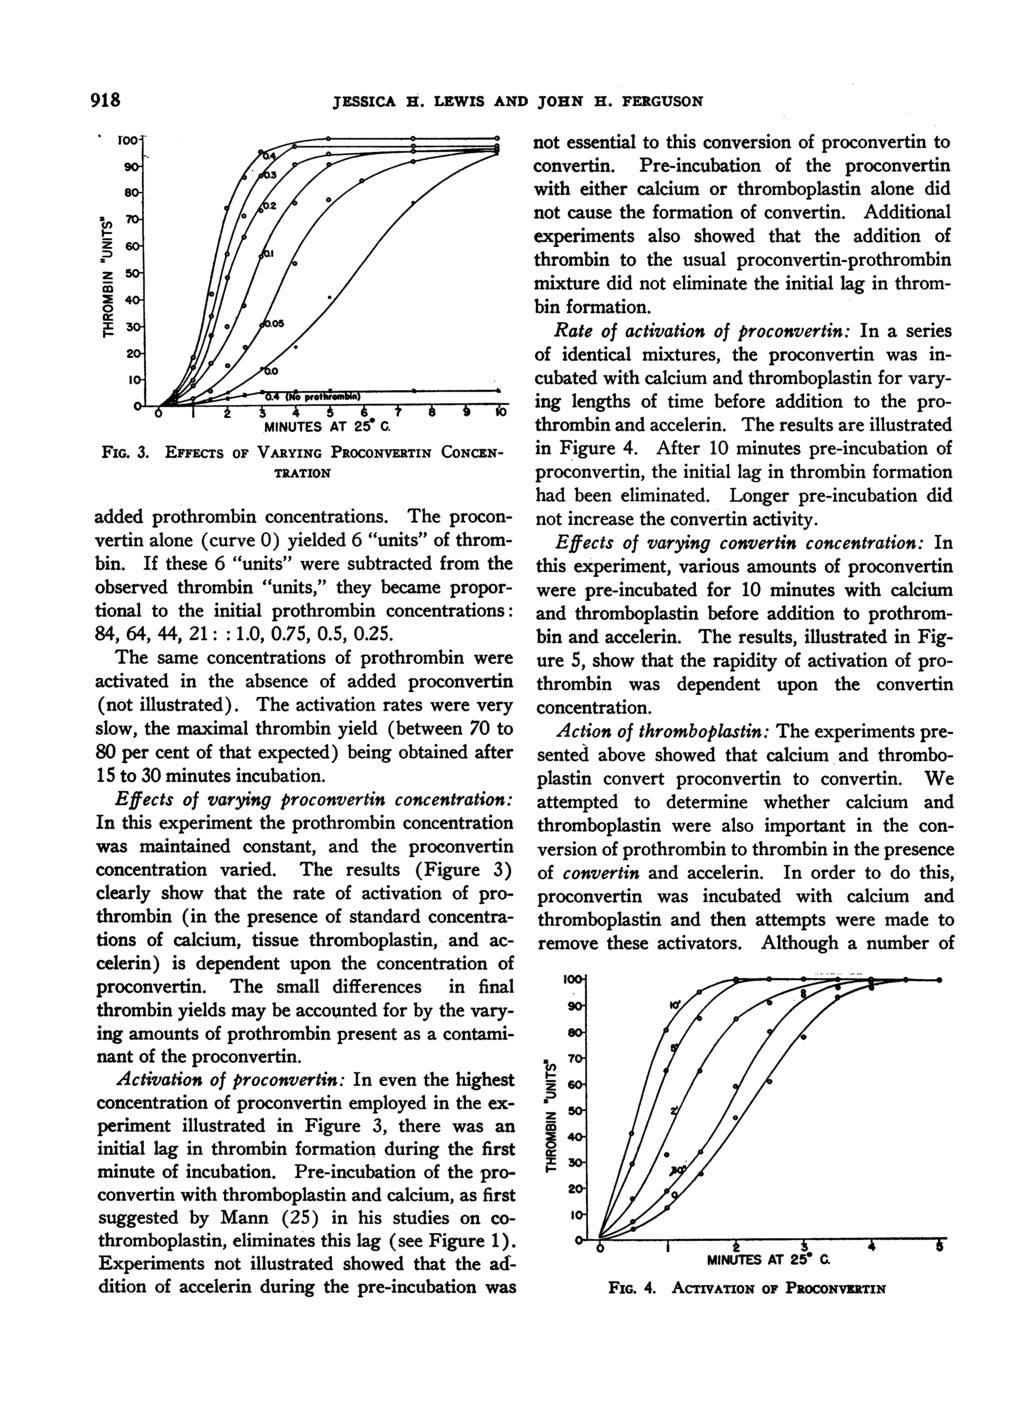 918 z 0 70-240 0~~~~~~ MINUTES AT 25 C. FIG. 3. EFFECTS OF VARYING PROCONVERTIN CONCE:N- TRATION JESSICA H. LEWIS AND JOHN H. FERGUSON added prothrombin concentrations.